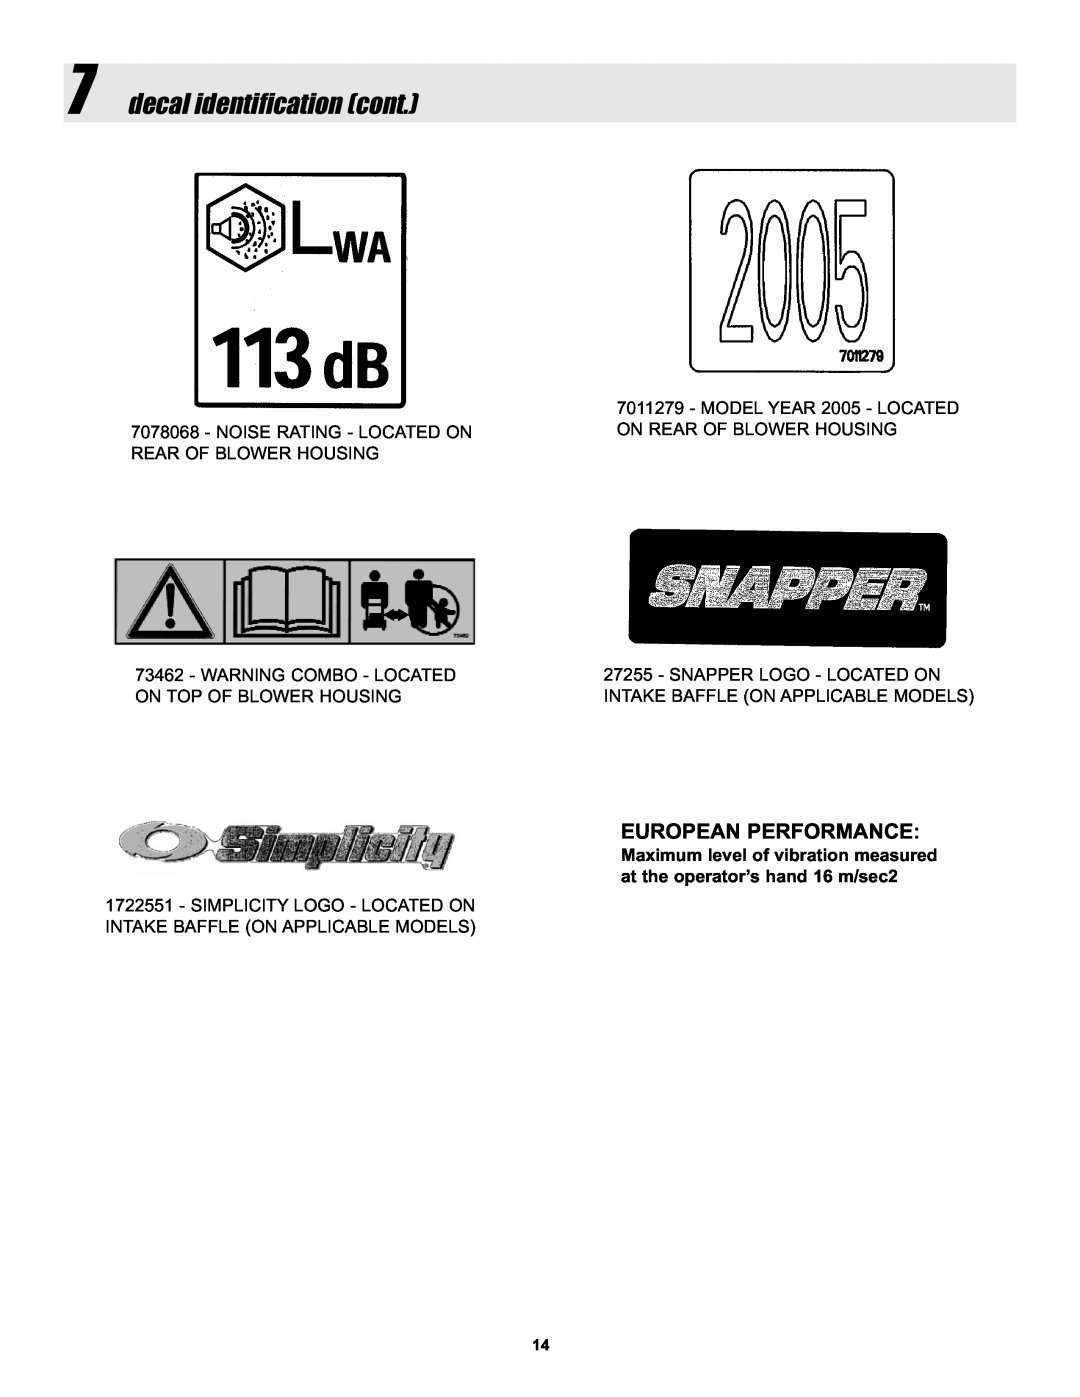 Snapper ELBC6152BV manual 7decal identification cont, European Performance 